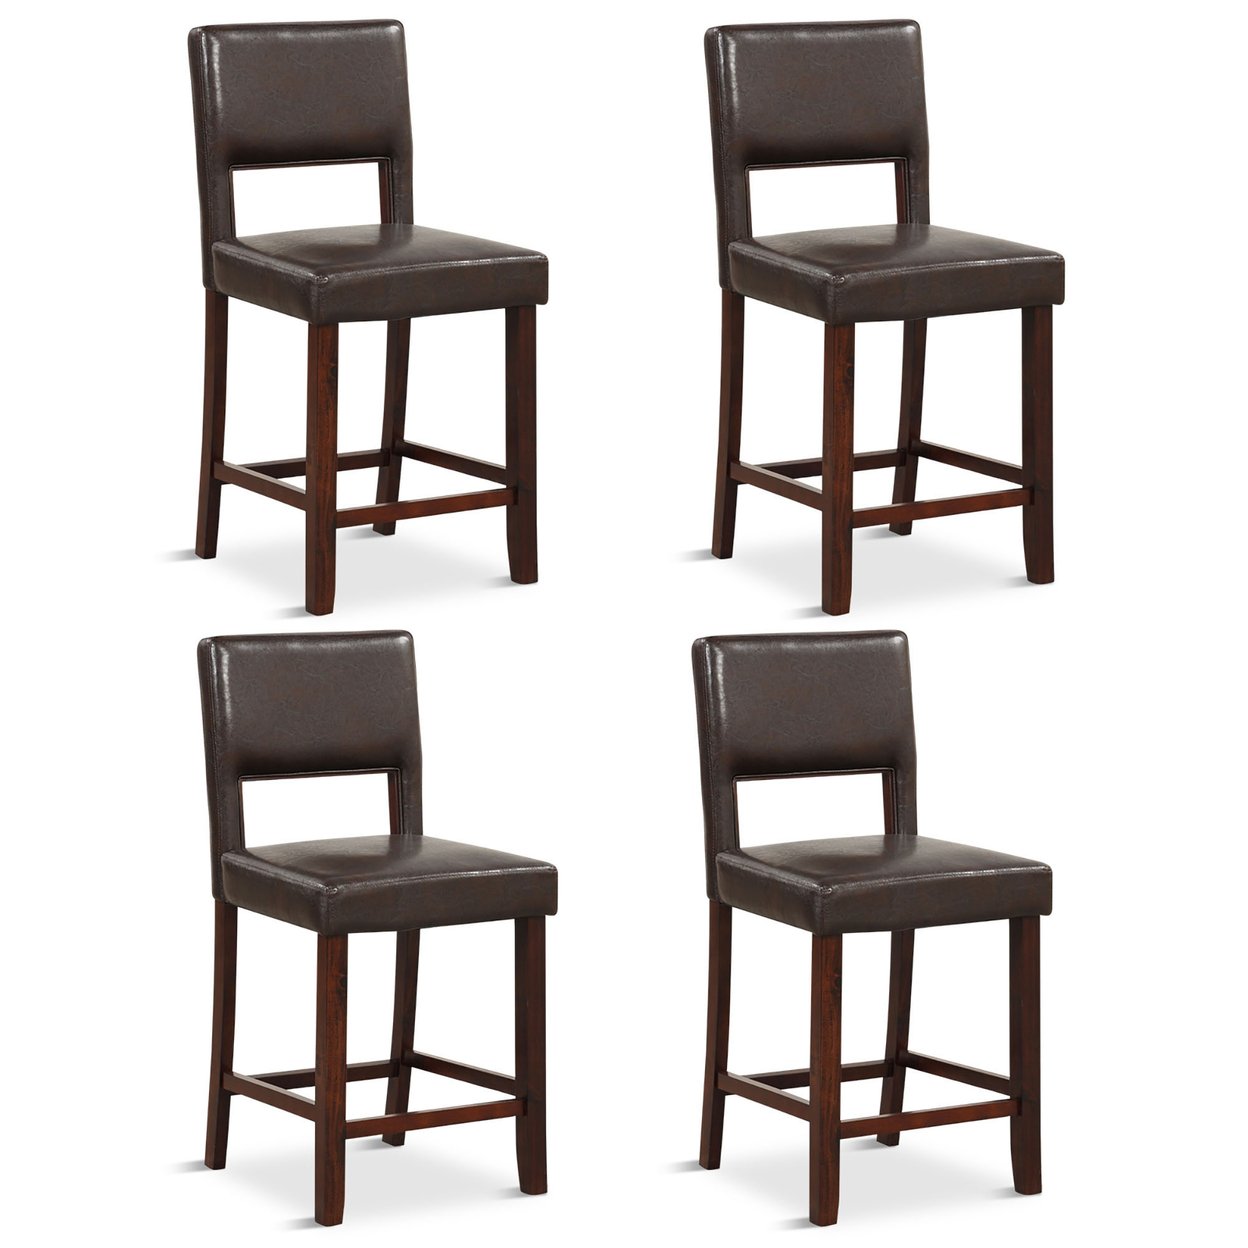 4-Piece Linen Fabric/PVC Leather Counter Height Bar Stool Set W/ Back & Rubber Wood Legs - Brown